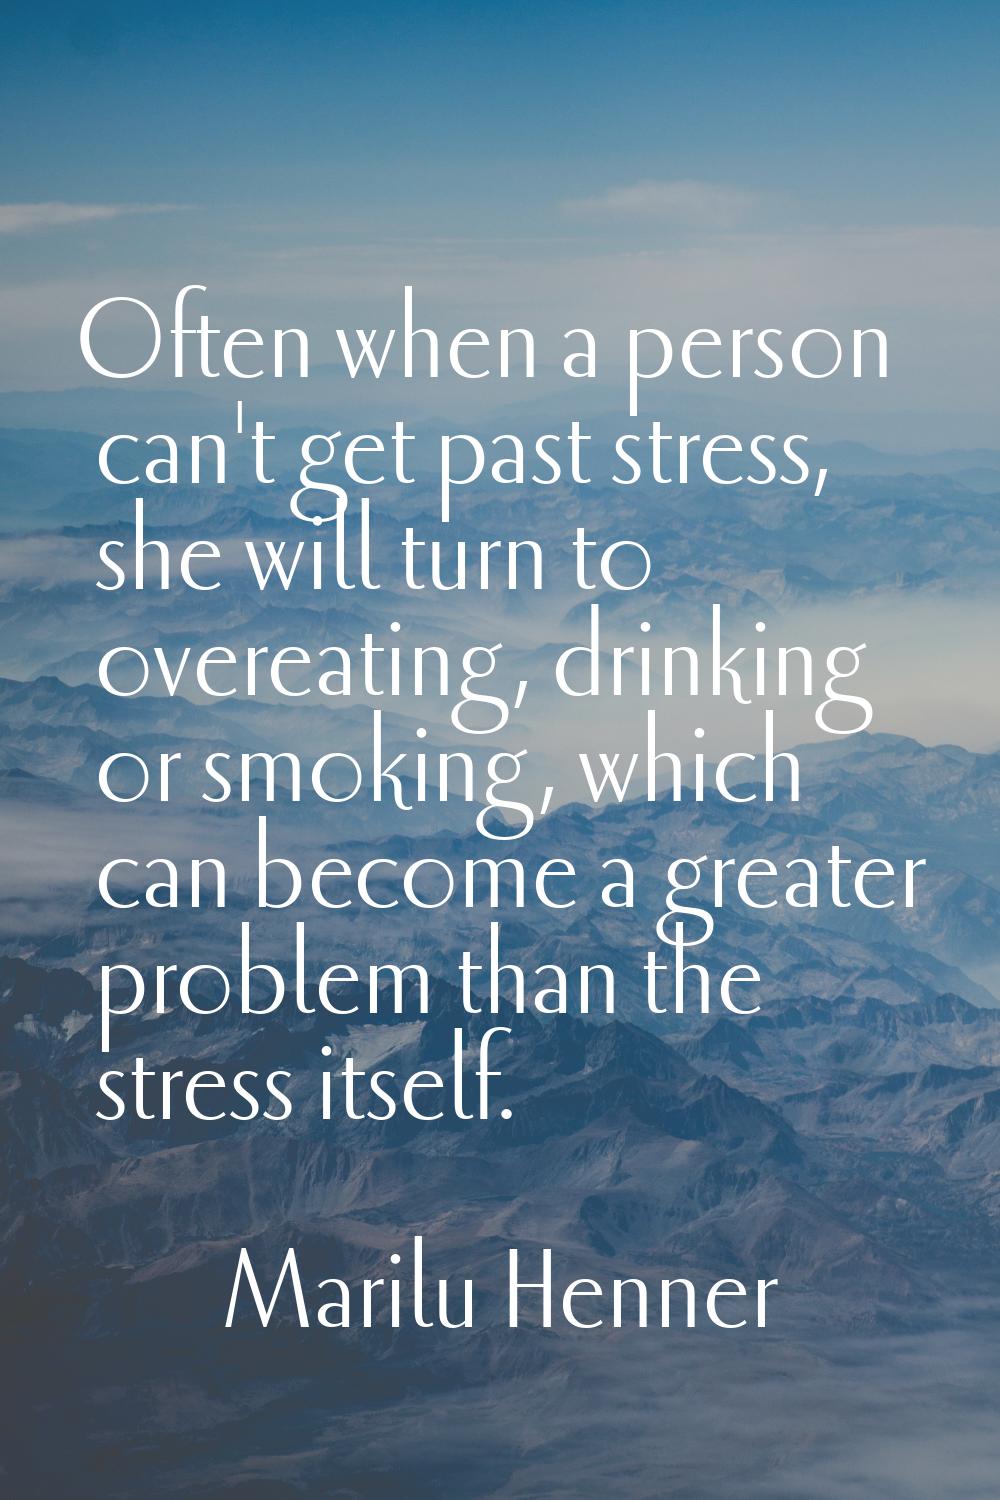 Often when a person can't get past stress, she will turn to overeating, drinking or smoking, which 